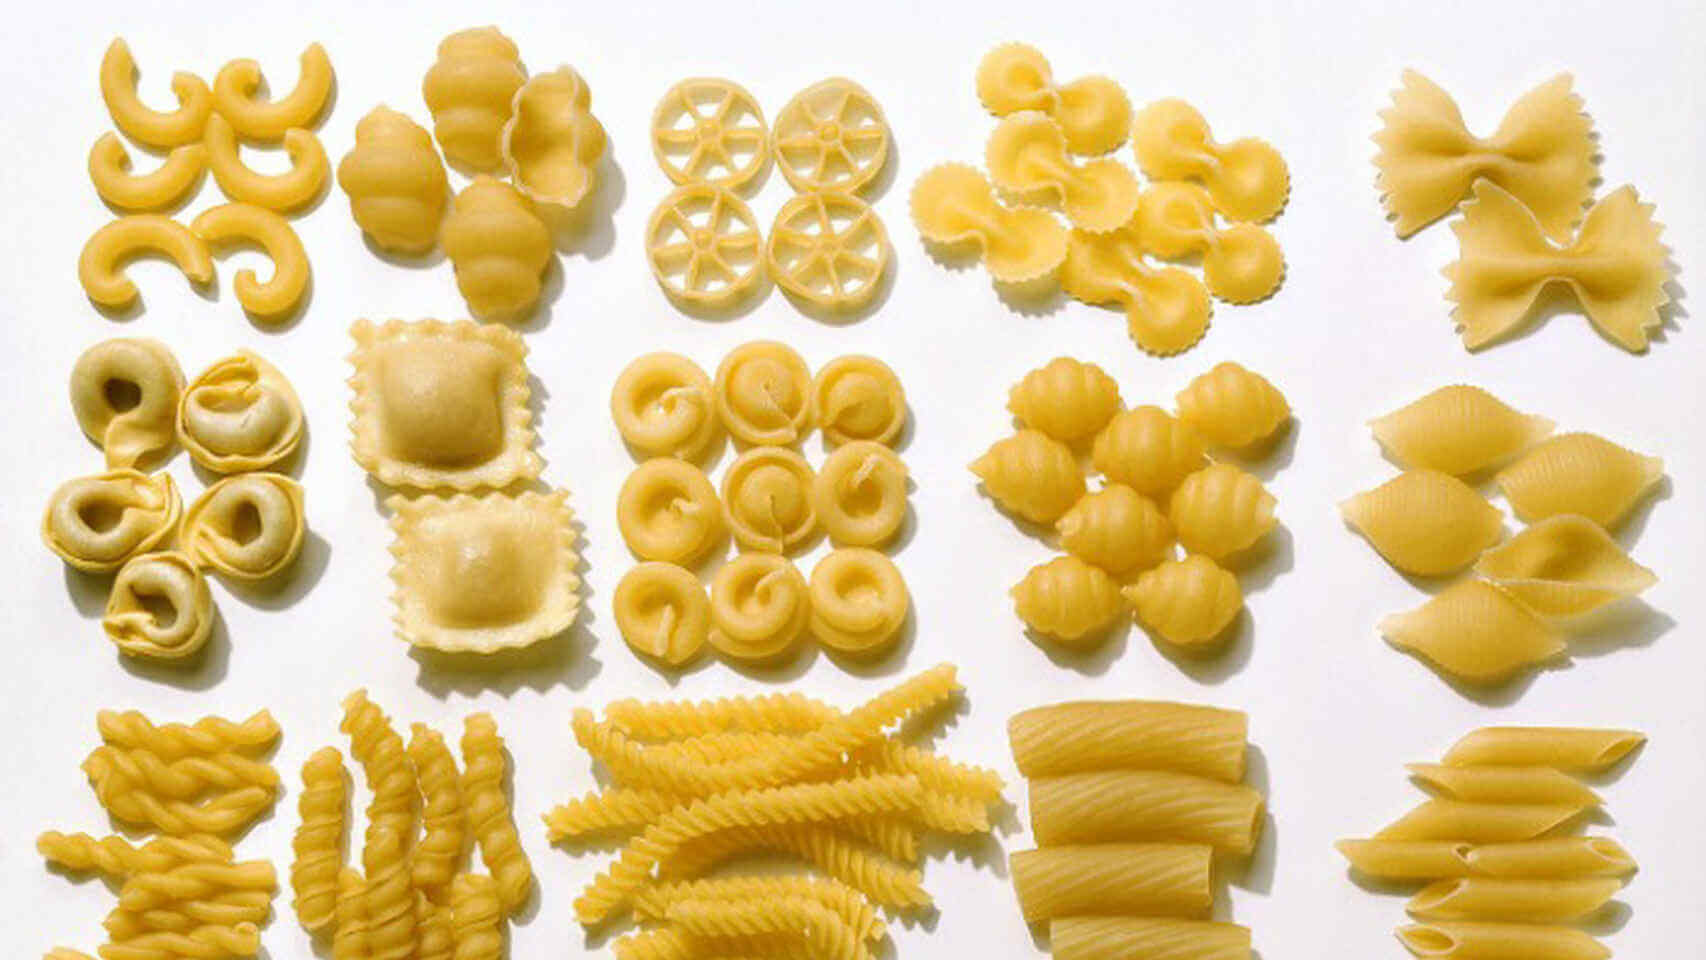 Maki Nut is a factory for producing and packing pasta, its types, ingredients, and processing method